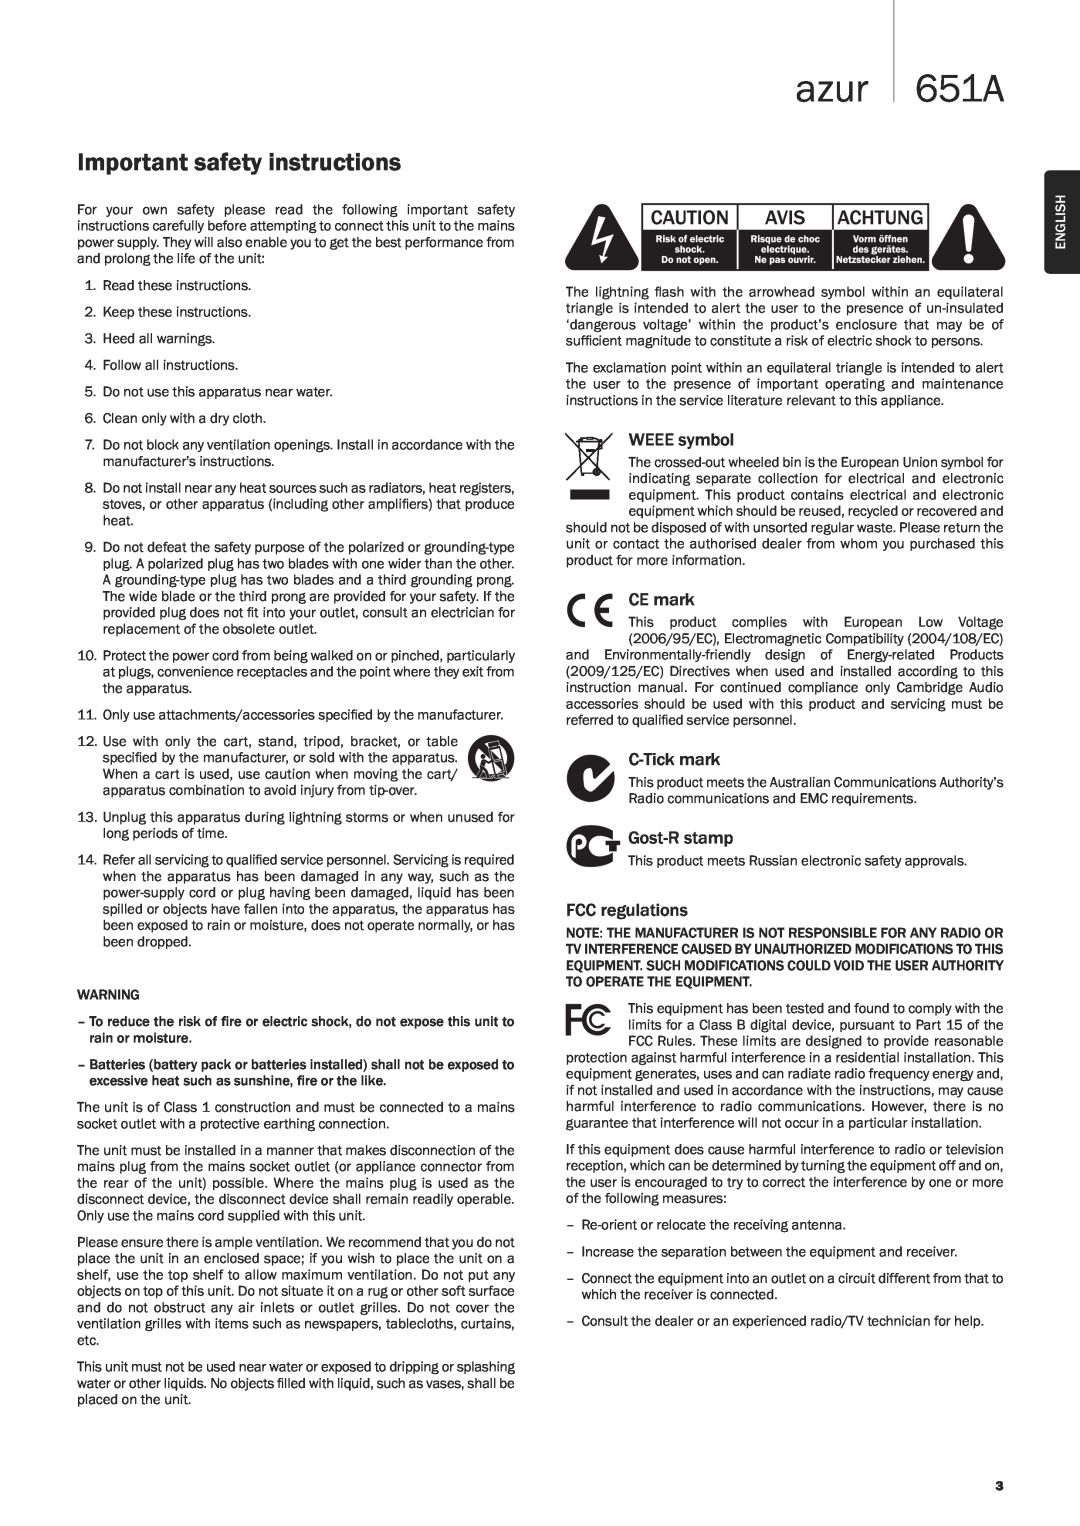 Cambridge Audio user manual azur 651A, Important safety instructions, English 